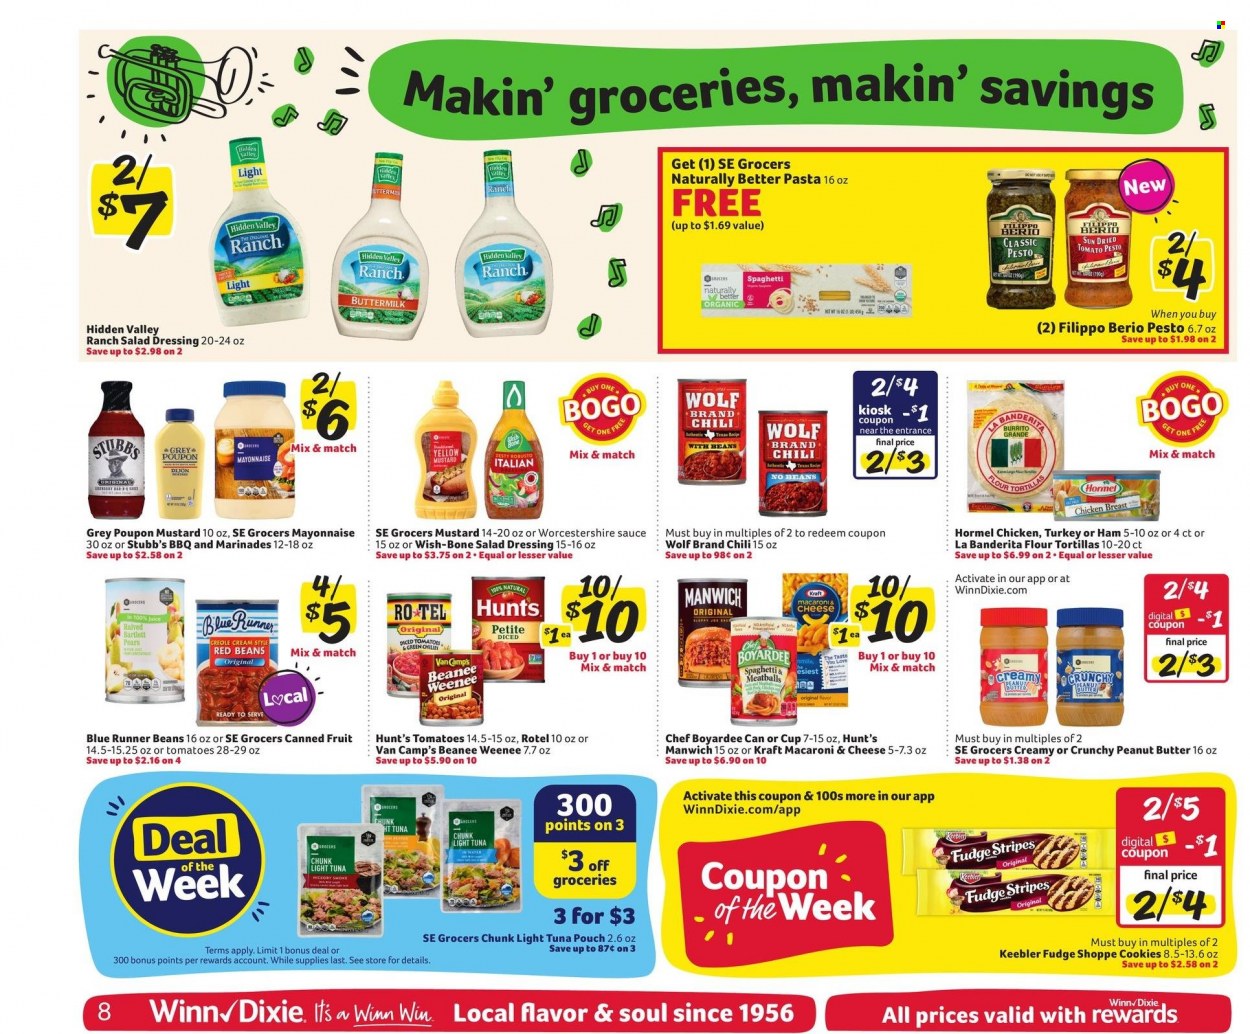 thumbnail - Winn Dixie Flyer - 10/06/2021 - 10/12/2021 - Sales products - Bartlett pears, tortillas, flour tortillas, tomatoes, pears, tuna, macaroni & cheese, spaghetti, meatballs, pasta, sauce, burrito, Kraft®, Hormel, buttermilk, mayonnaise, cookies, fudge, Keebler, red beans, dried tomatoes, light tuna, Manwich, Chef Boyardee, canned fruit, mustard, salad dressing, worcestershire sauce, pesto, dressing, peanut butter, juice, chicken breasts, cup. Page 10.